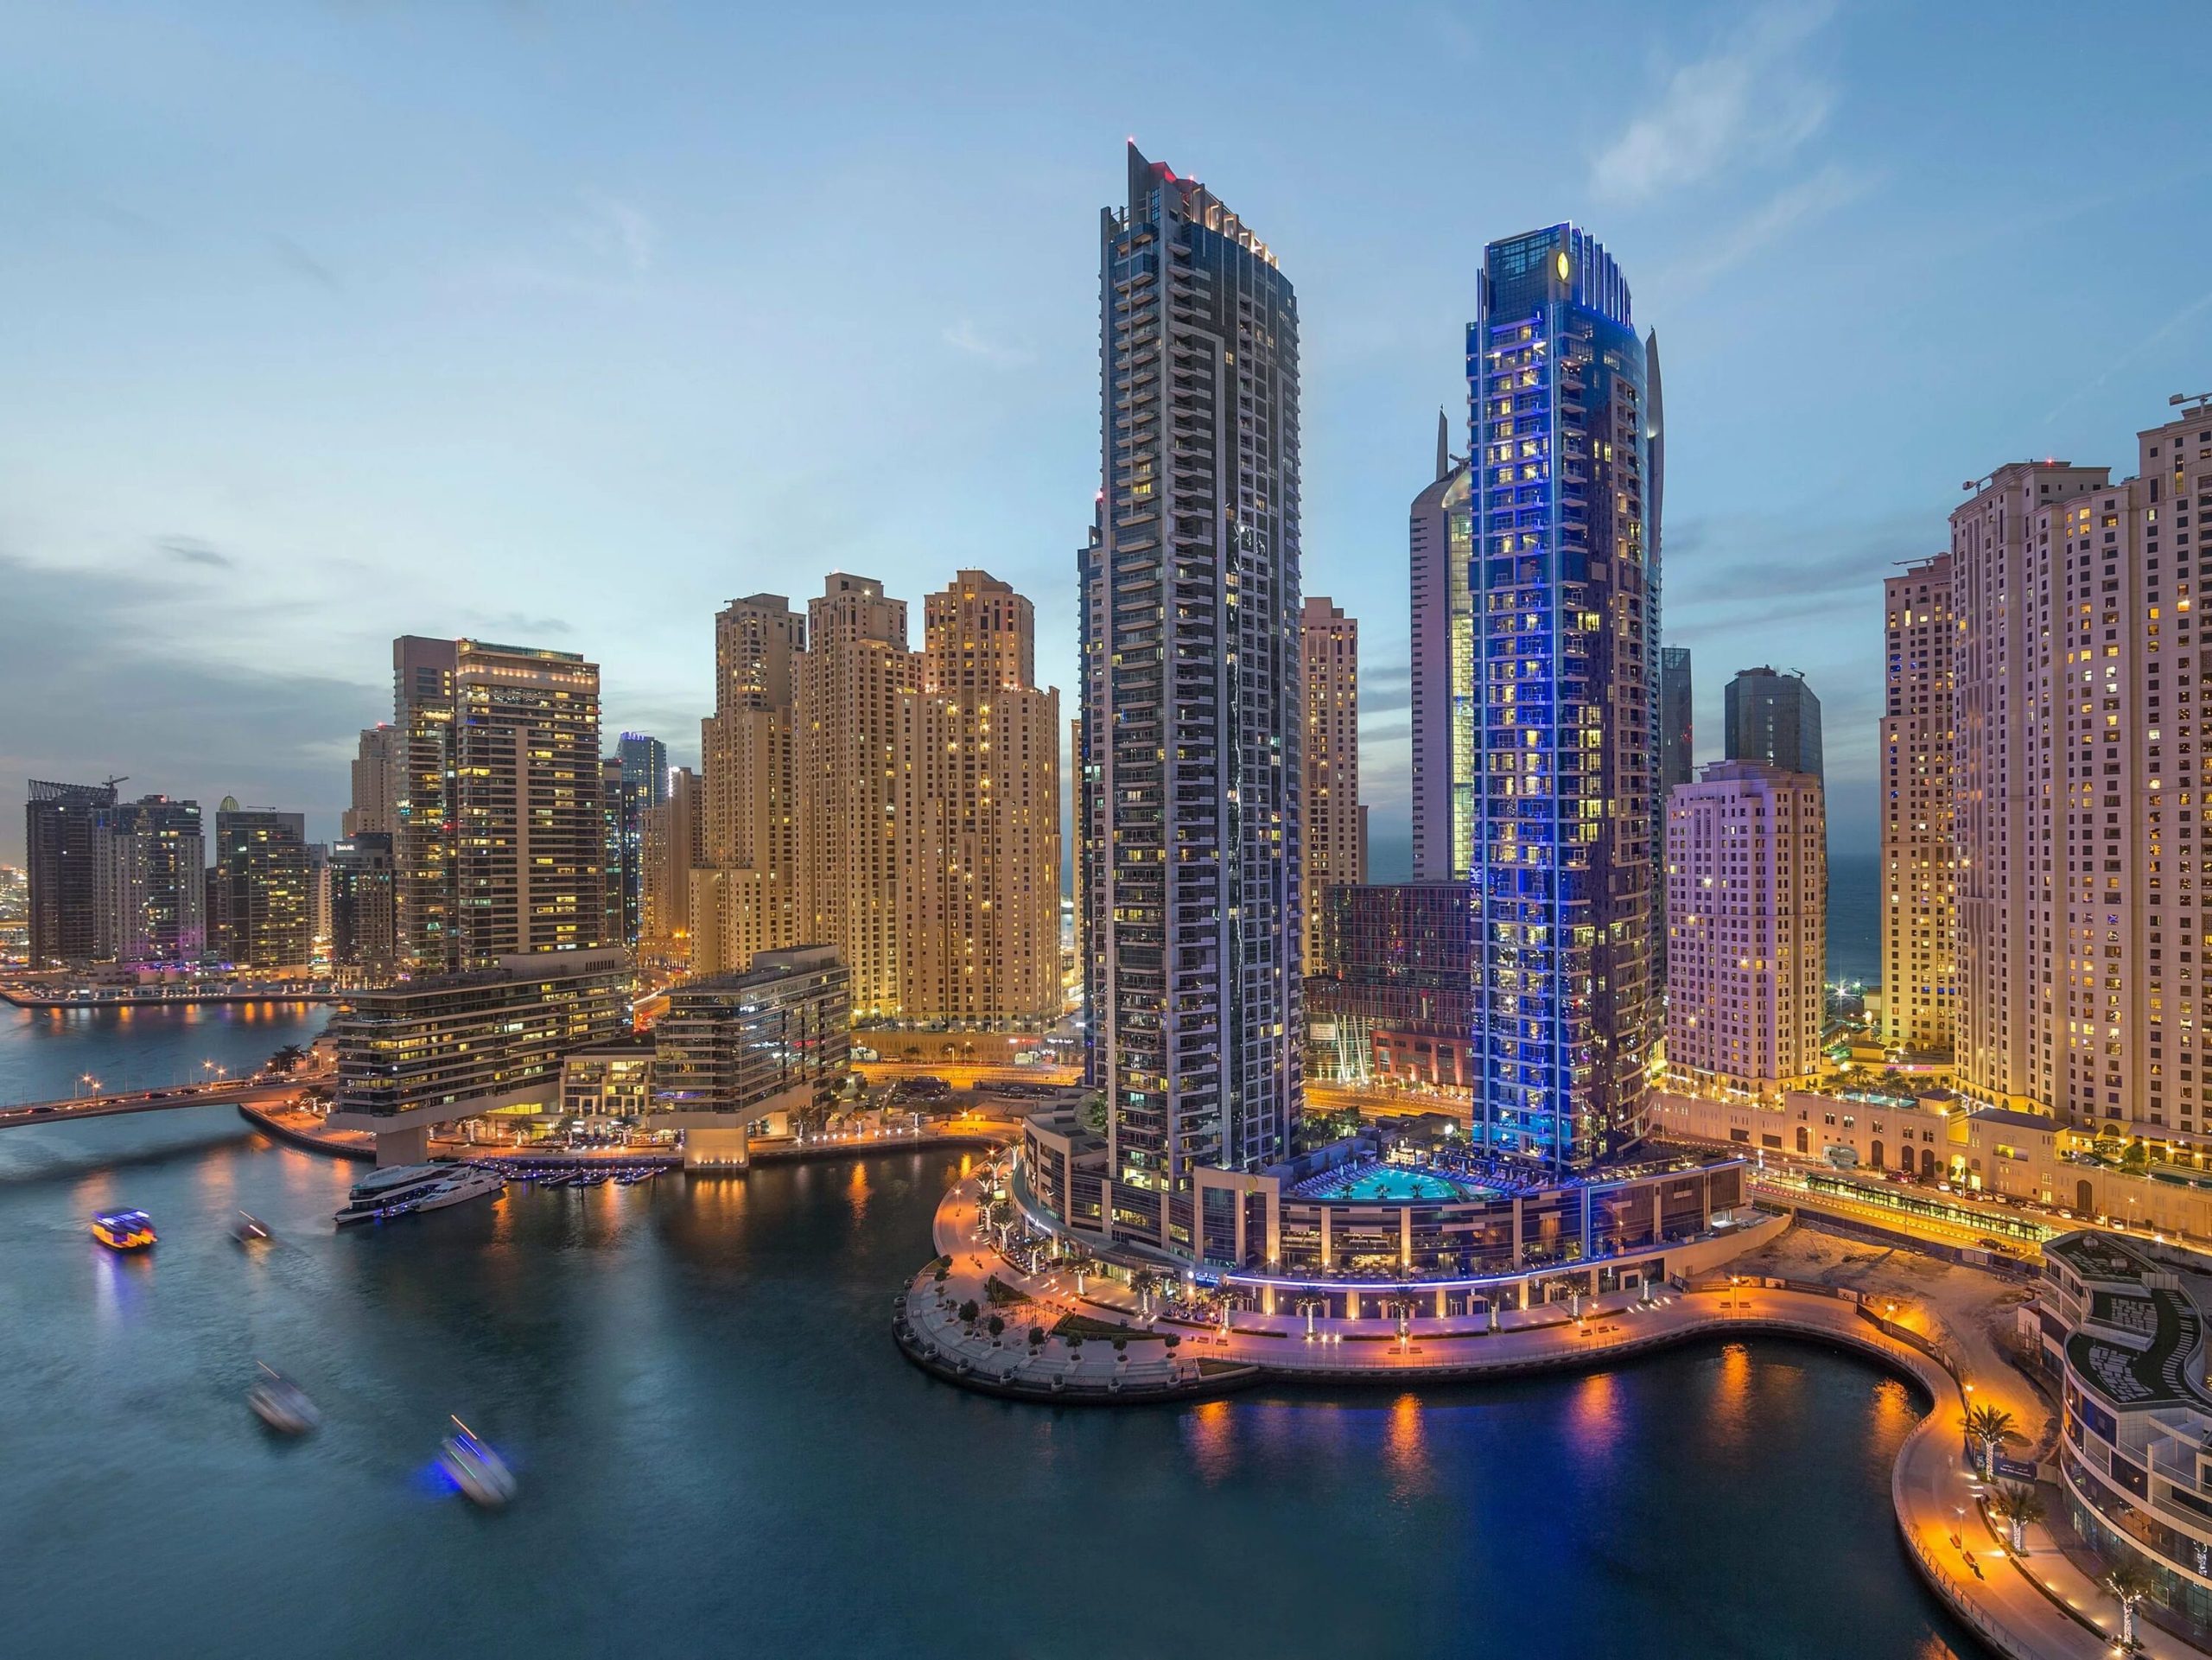 Dubai Marina: A Comprehensive Look at the Most Sought-After Residential Complex